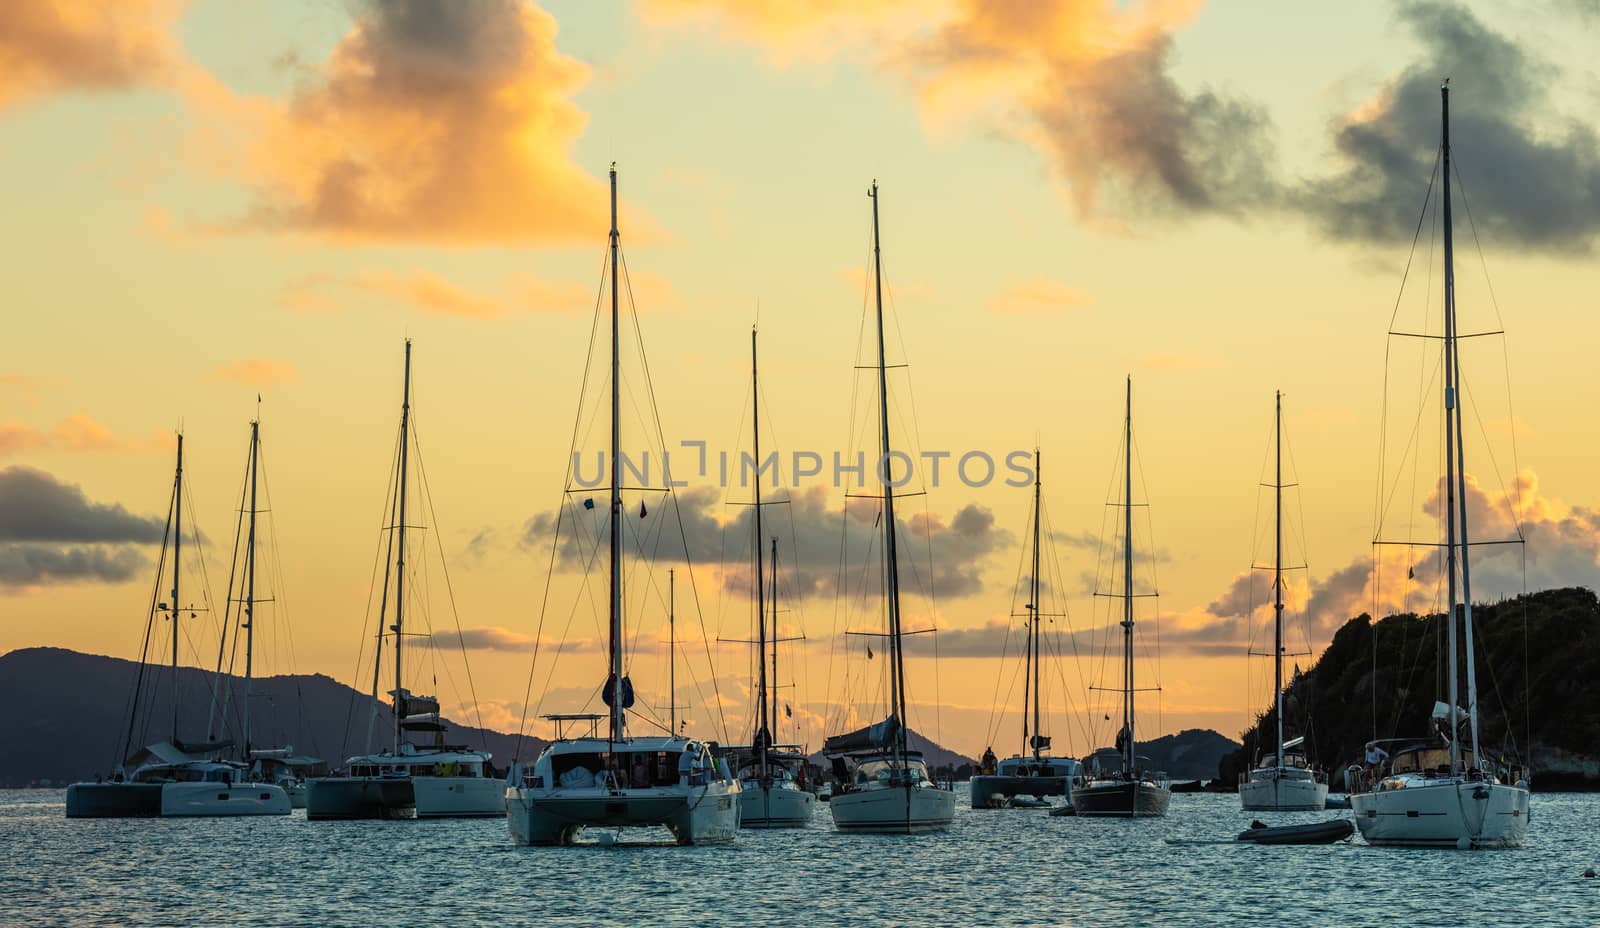 Sunset panorama with lots of parked yachts and catamarans, Tobag by ambeon